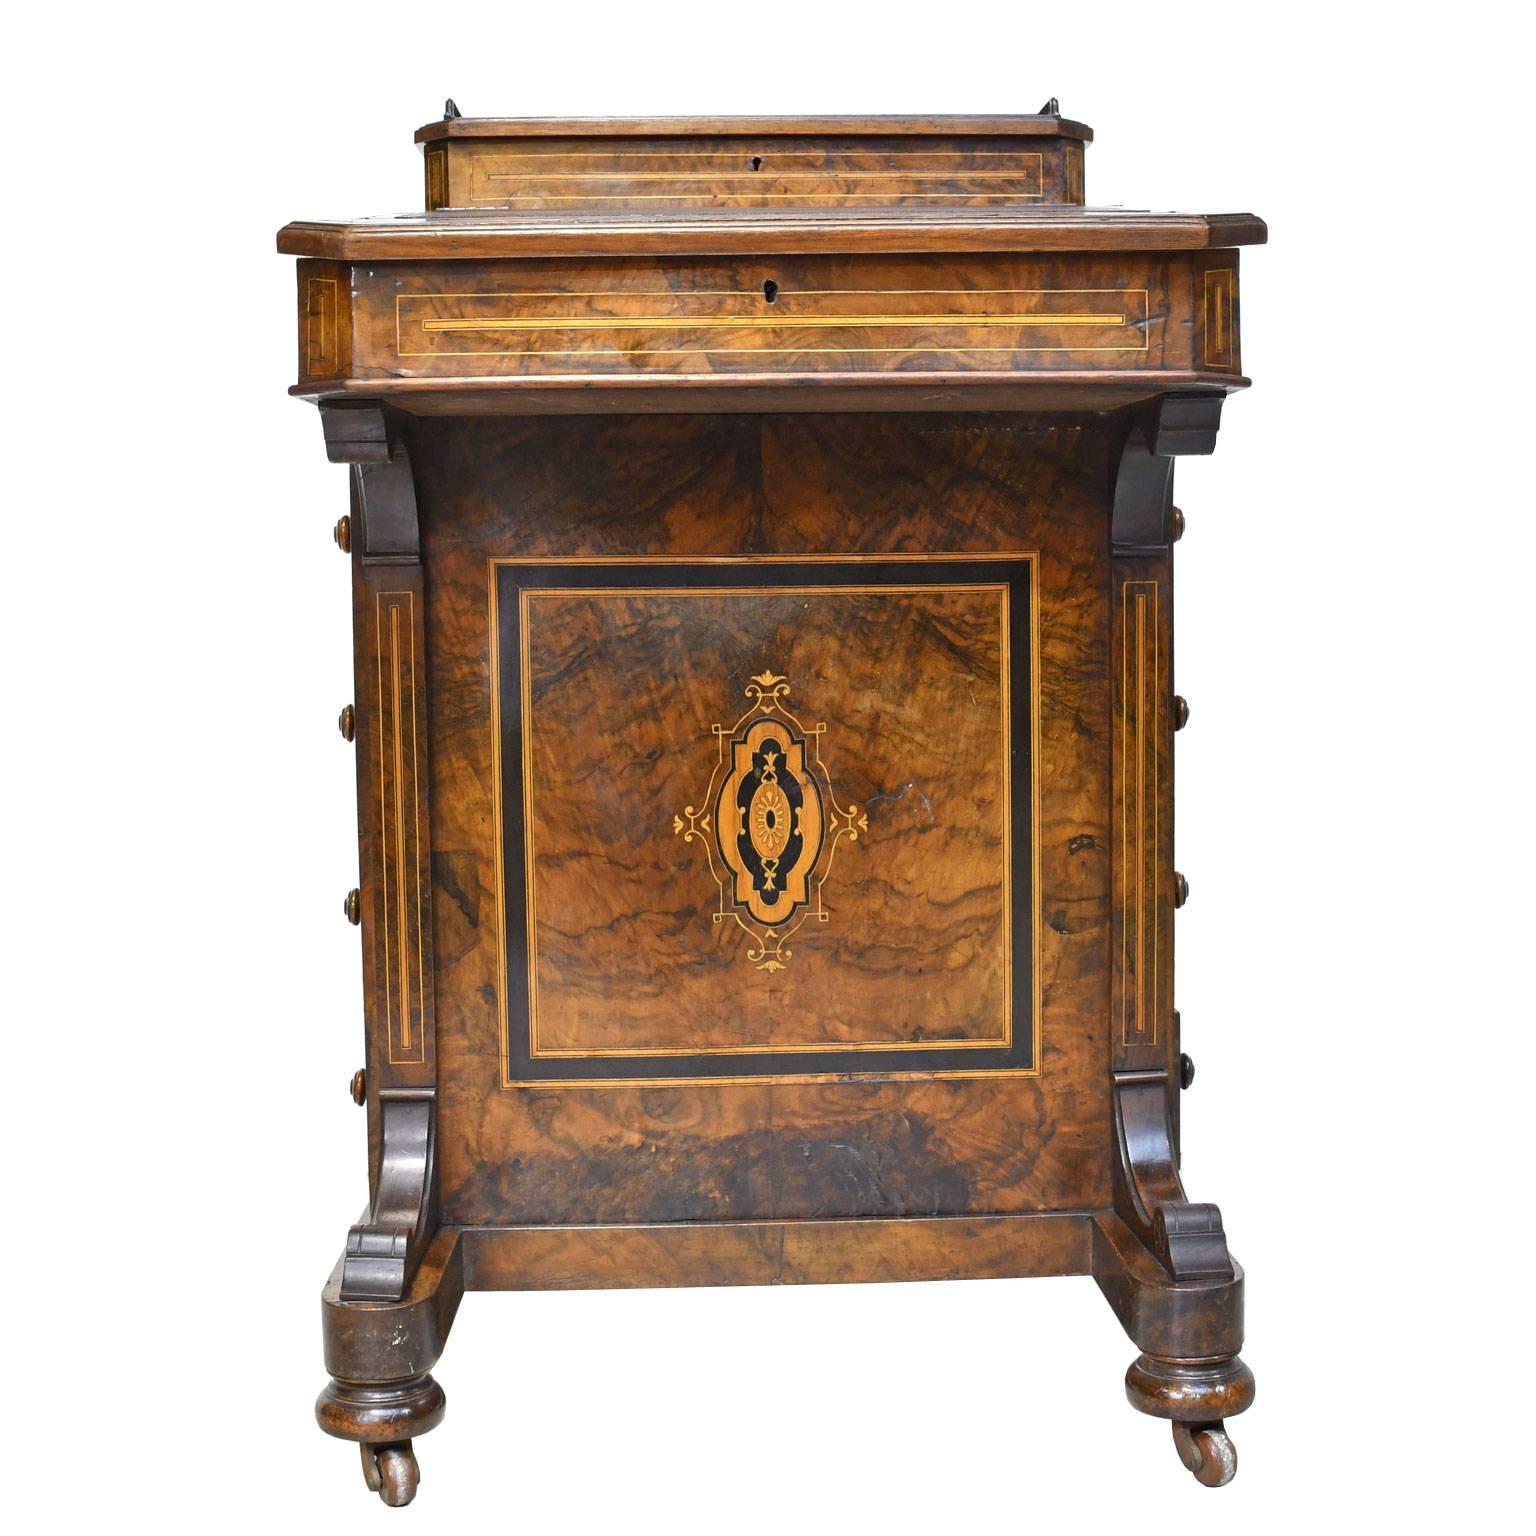 A handsome English Victorian Davenport desk in burled and solid walnut with beautiful inlays in ebonized wood, kingwood and tulipwood. Has original inset brown leather with gold tooling on writing surface, and two glass inkwells and a few pen nibs.